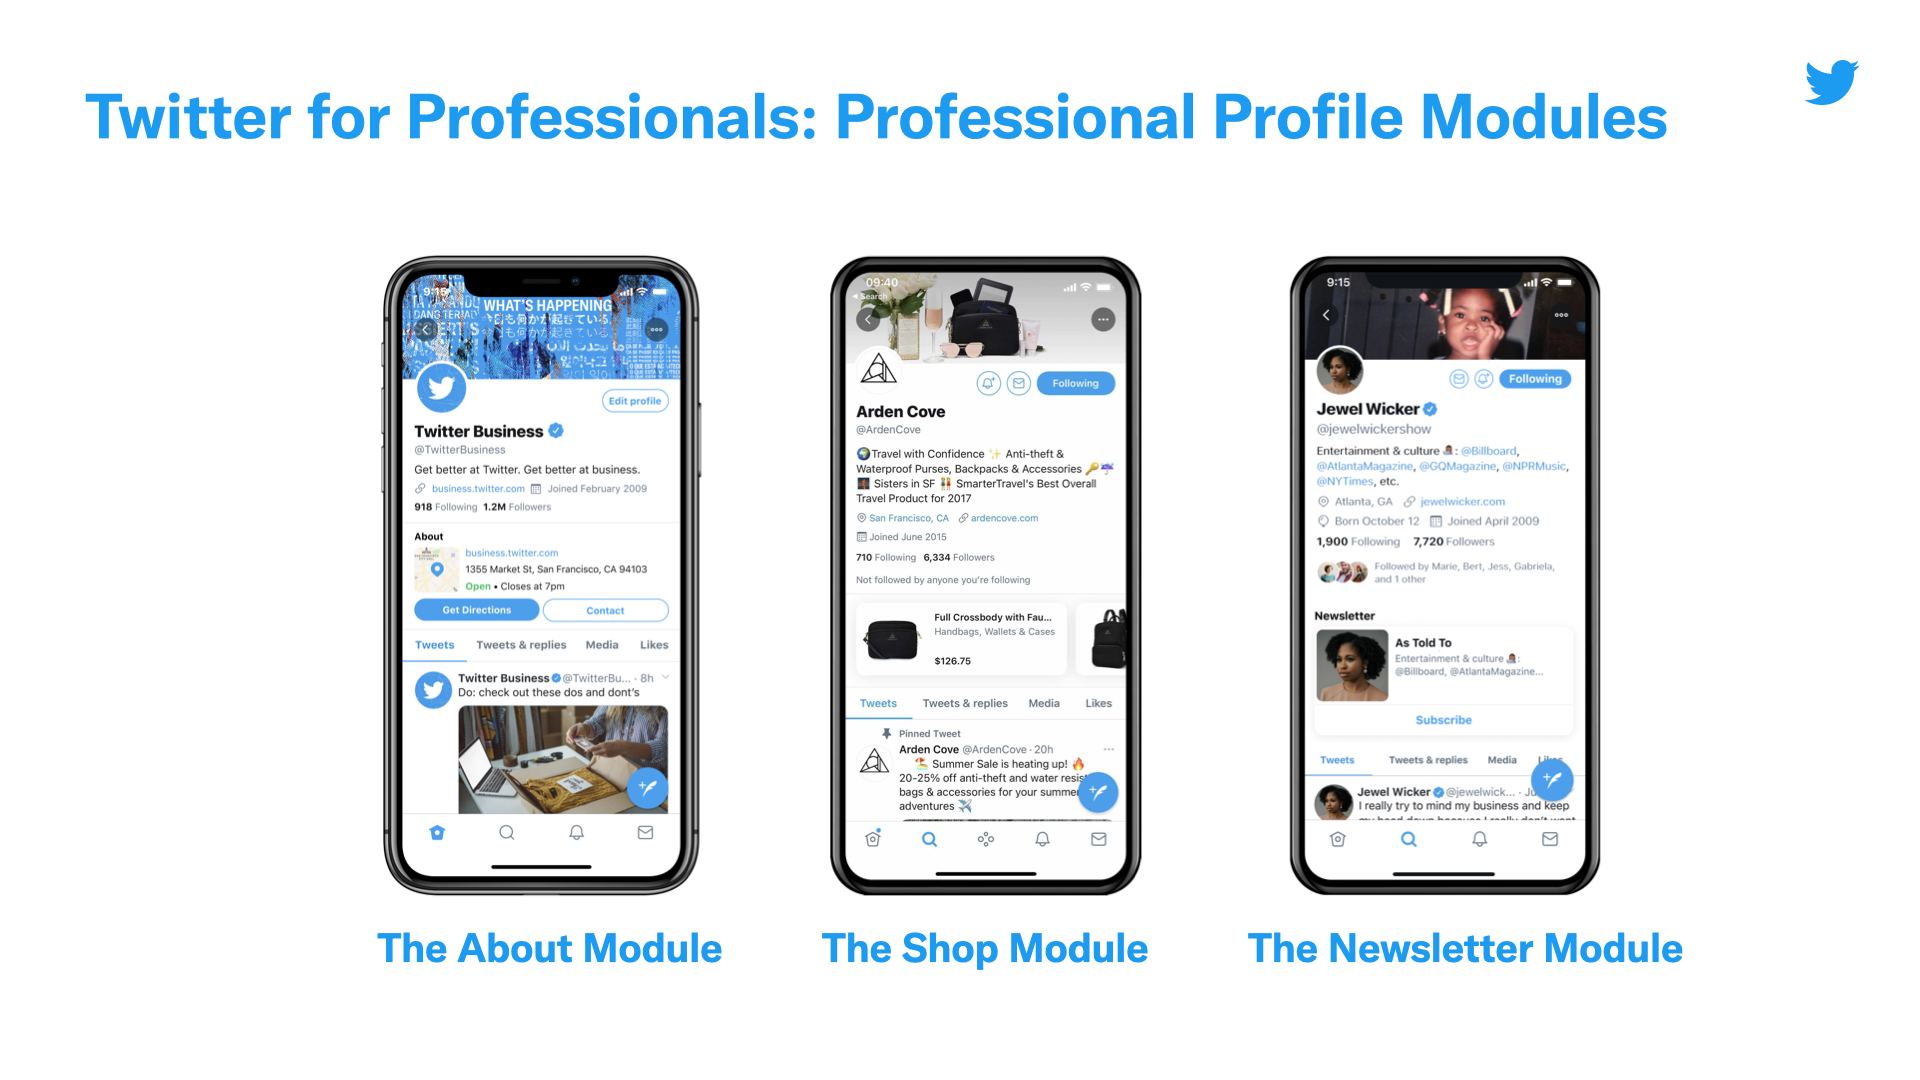 Twitter for Professionals modules